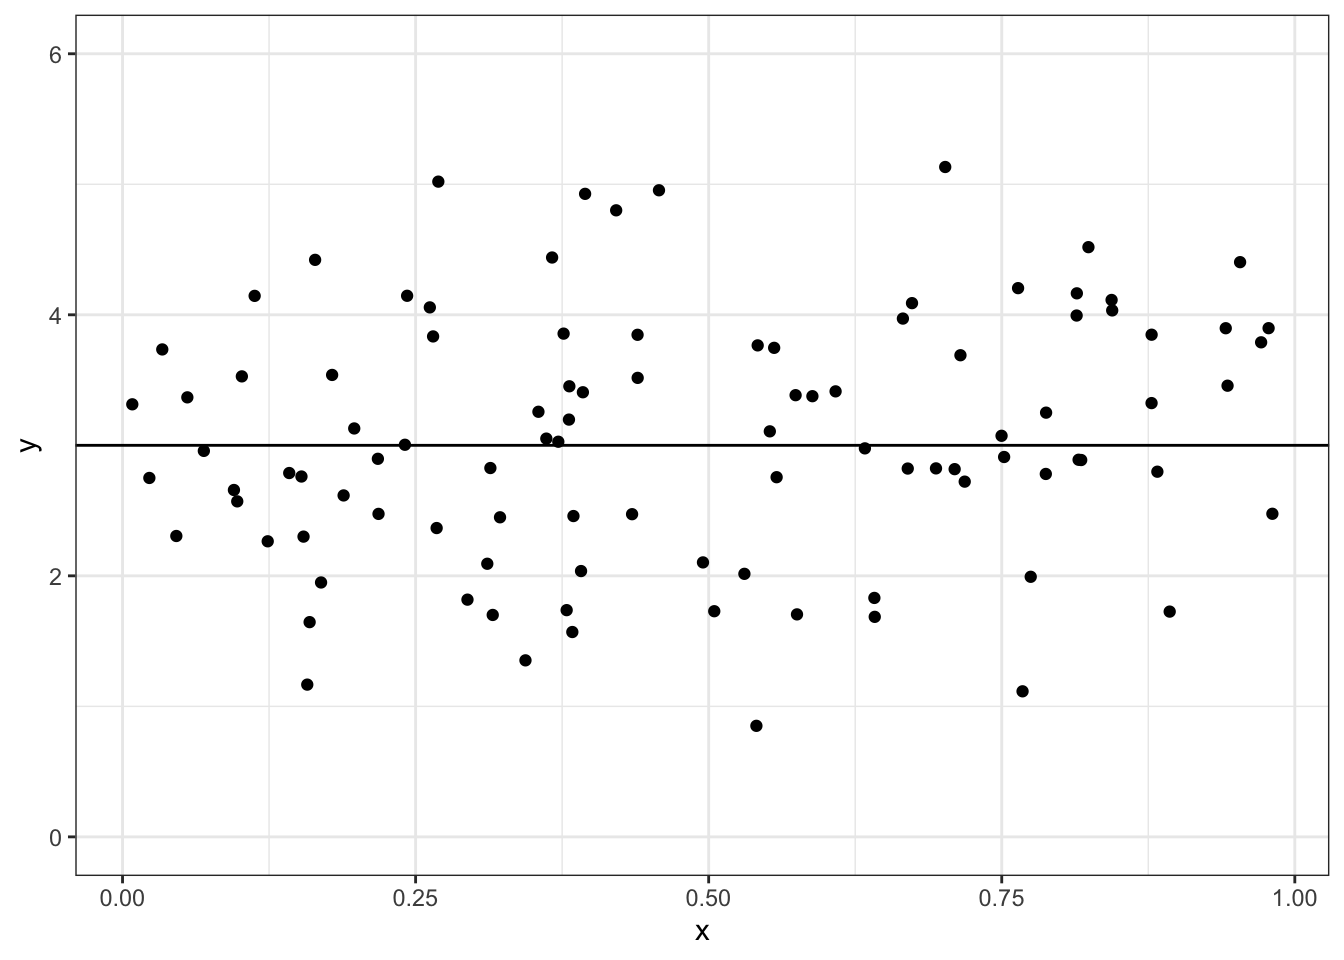 Example data from a hypothetical regression model with $\beta_0 = 3$ and $\beta_1 = 0$. The black line shows the *true* mean of $y$ as a function of $x$.